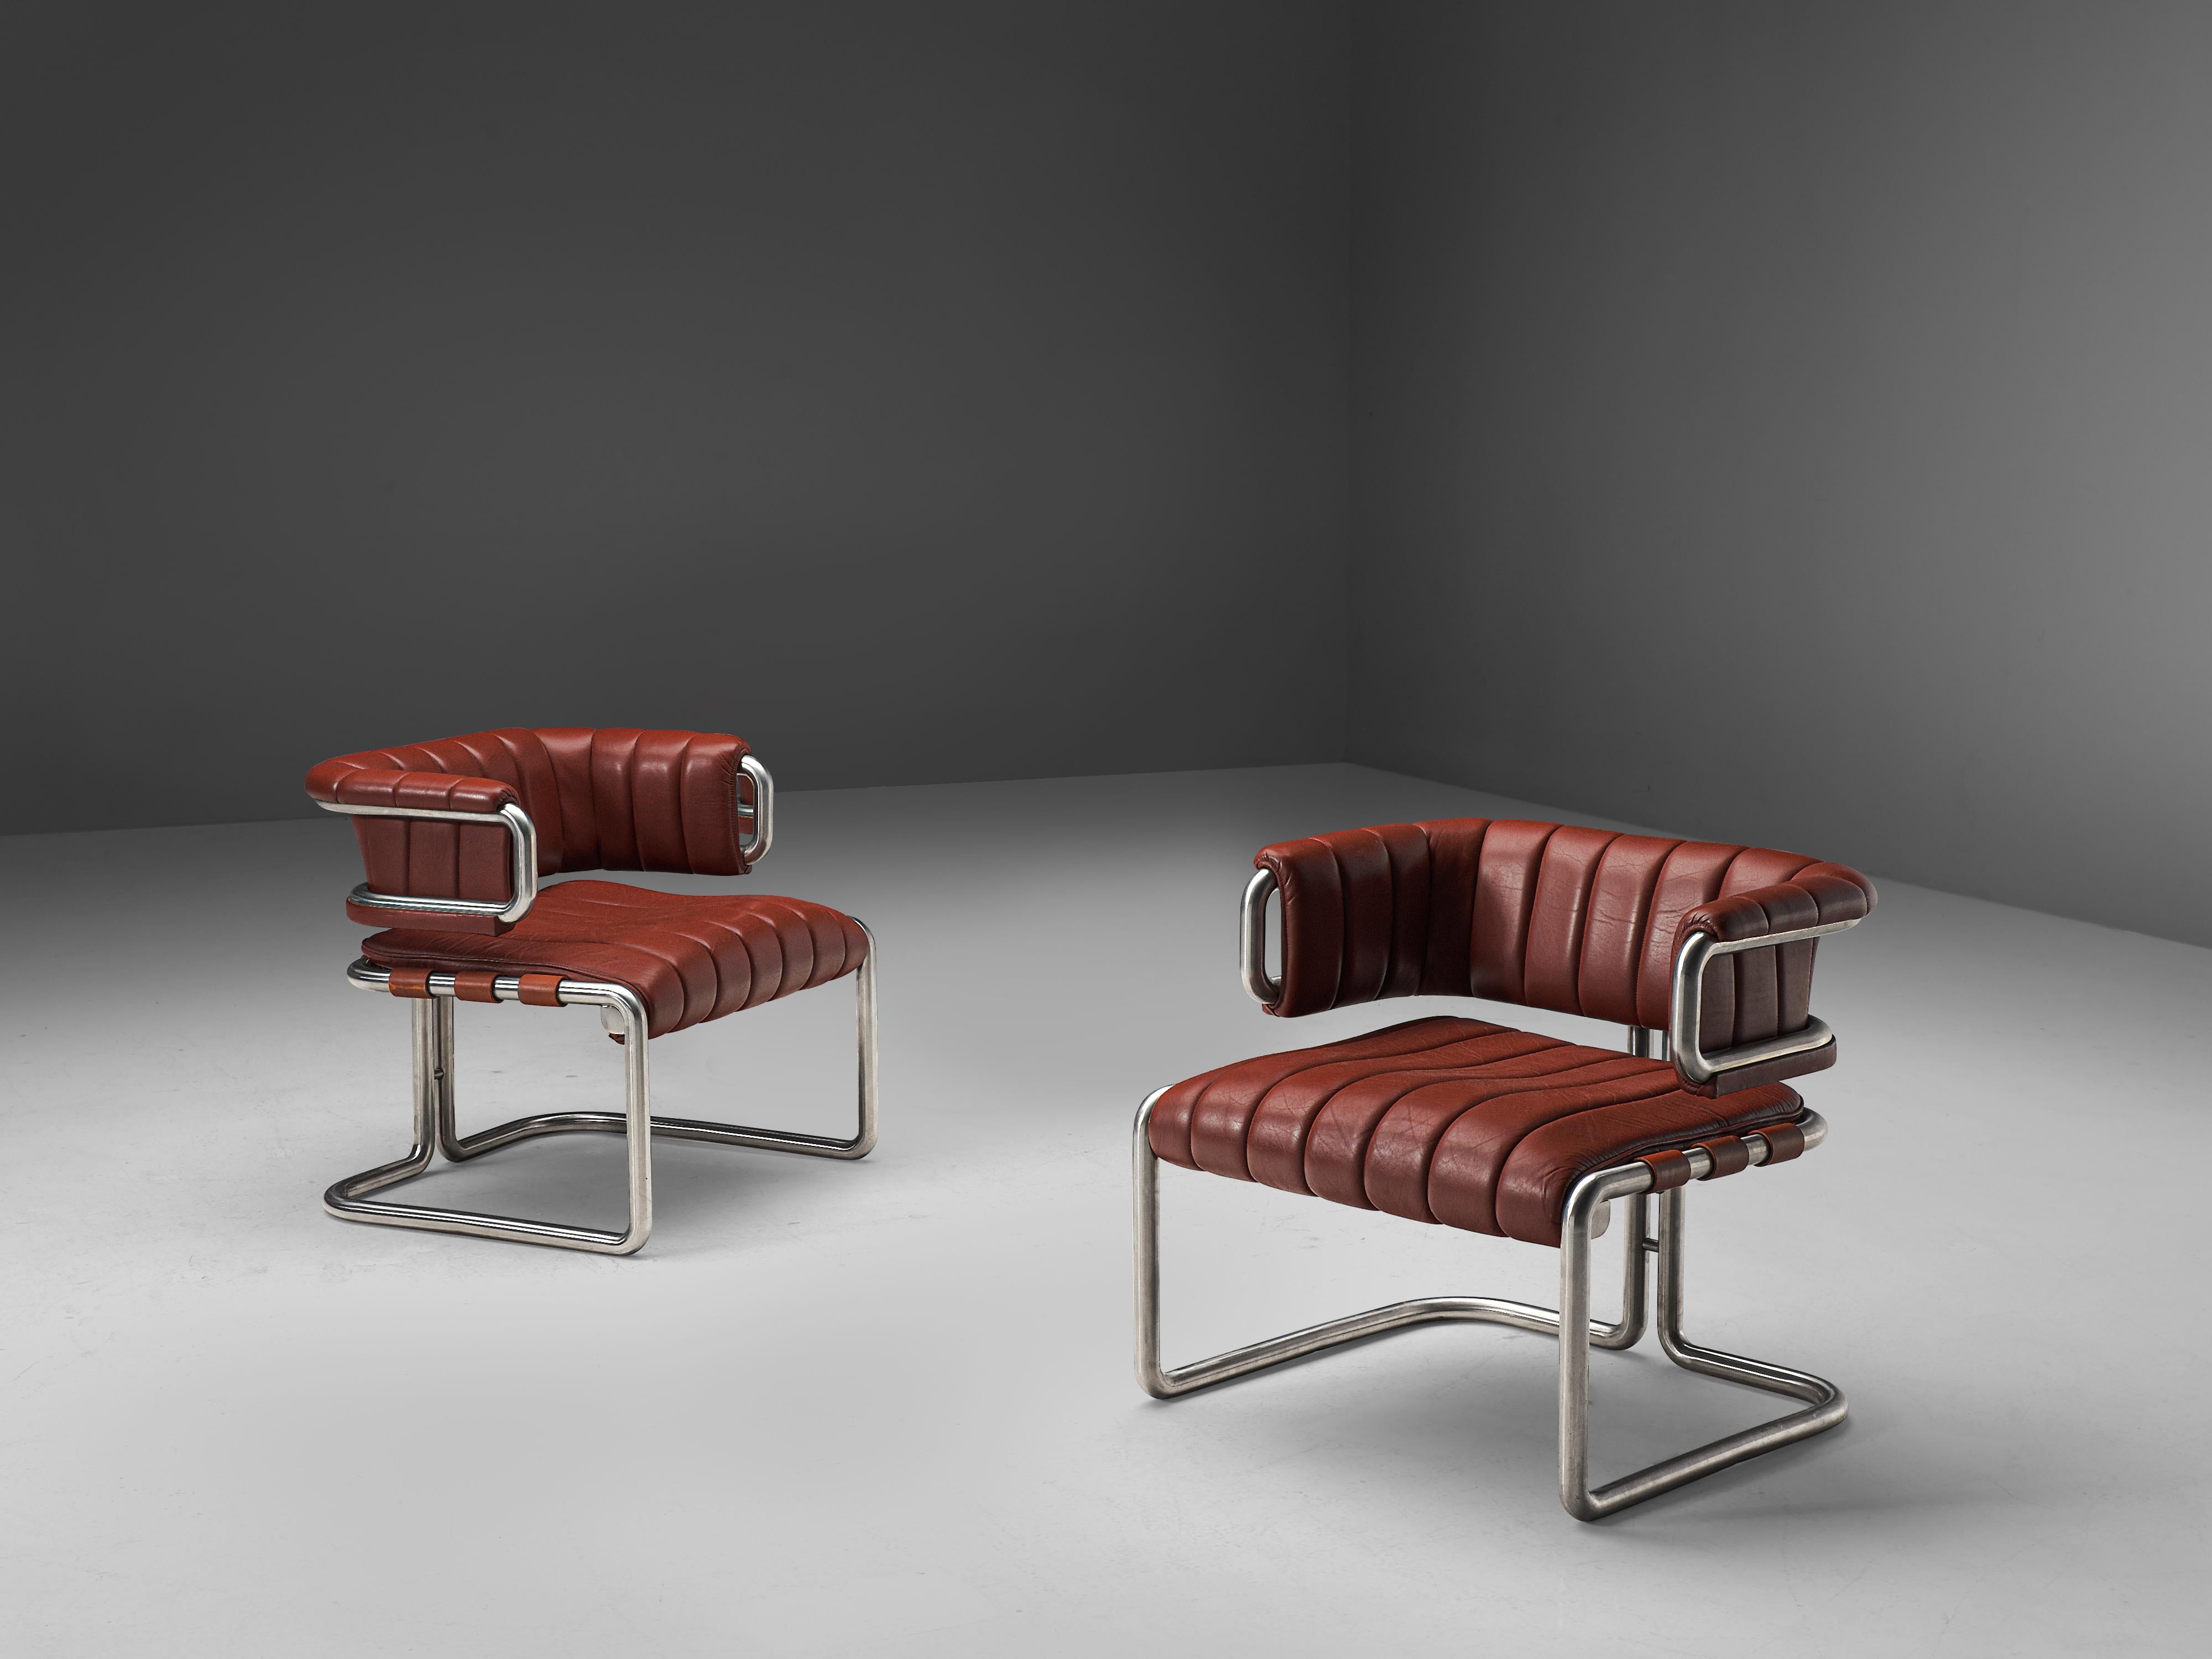 Lounge chairs, red leather, tubular steel, Germany, 1960s

This set is characterized by clear, straight lines that are noticeable in the leather as well. The tubular frame is made out of stainless steel and shows beautiful forms. In the back two